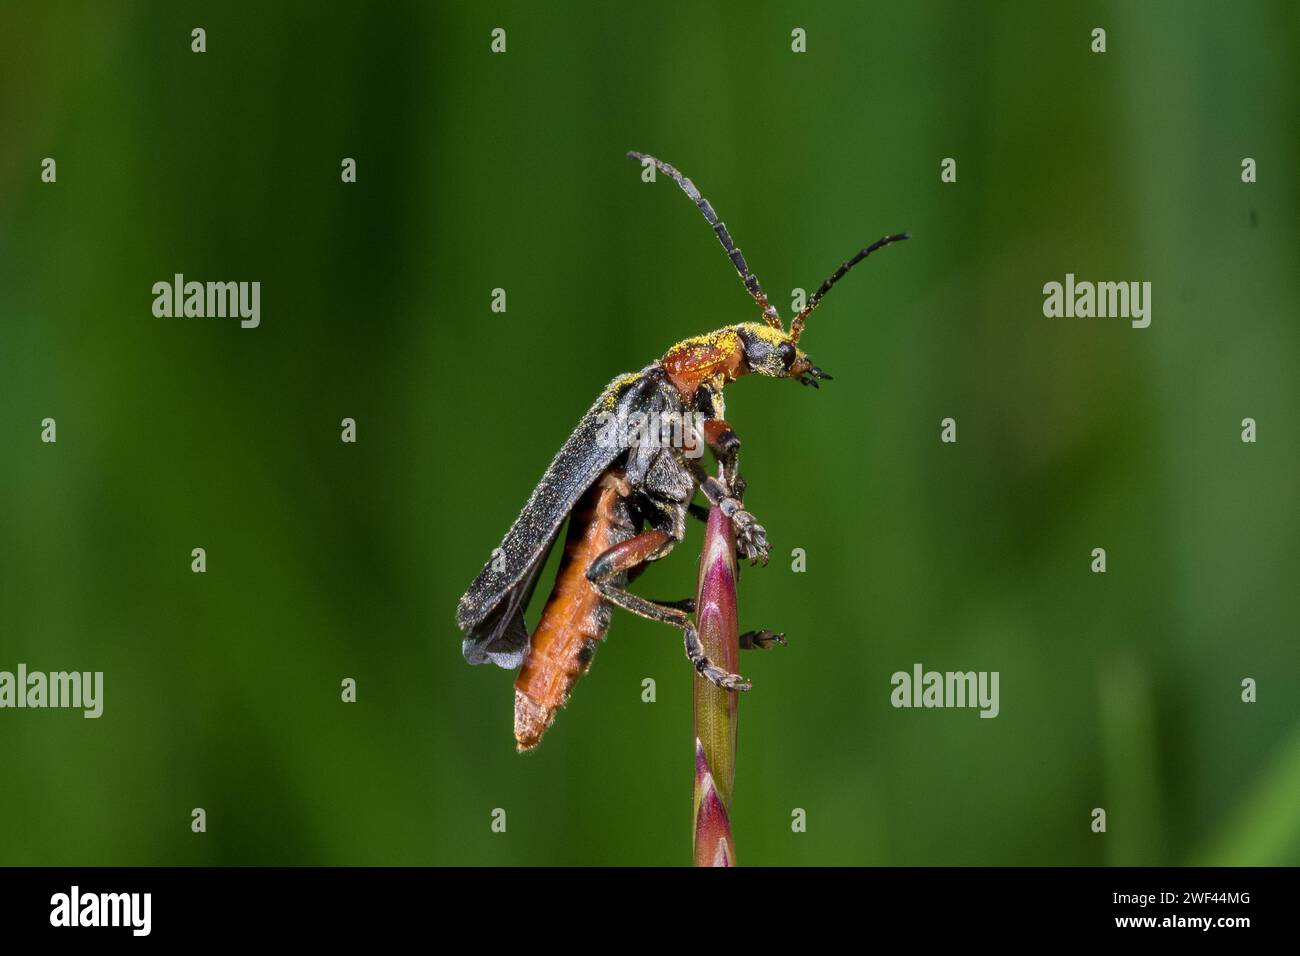 A soldier beetle (Cantharis rustica) appears to scout its surroundings from its perch atop a grass stalk. Barnes Park, Sunderland, UK Stock Photo